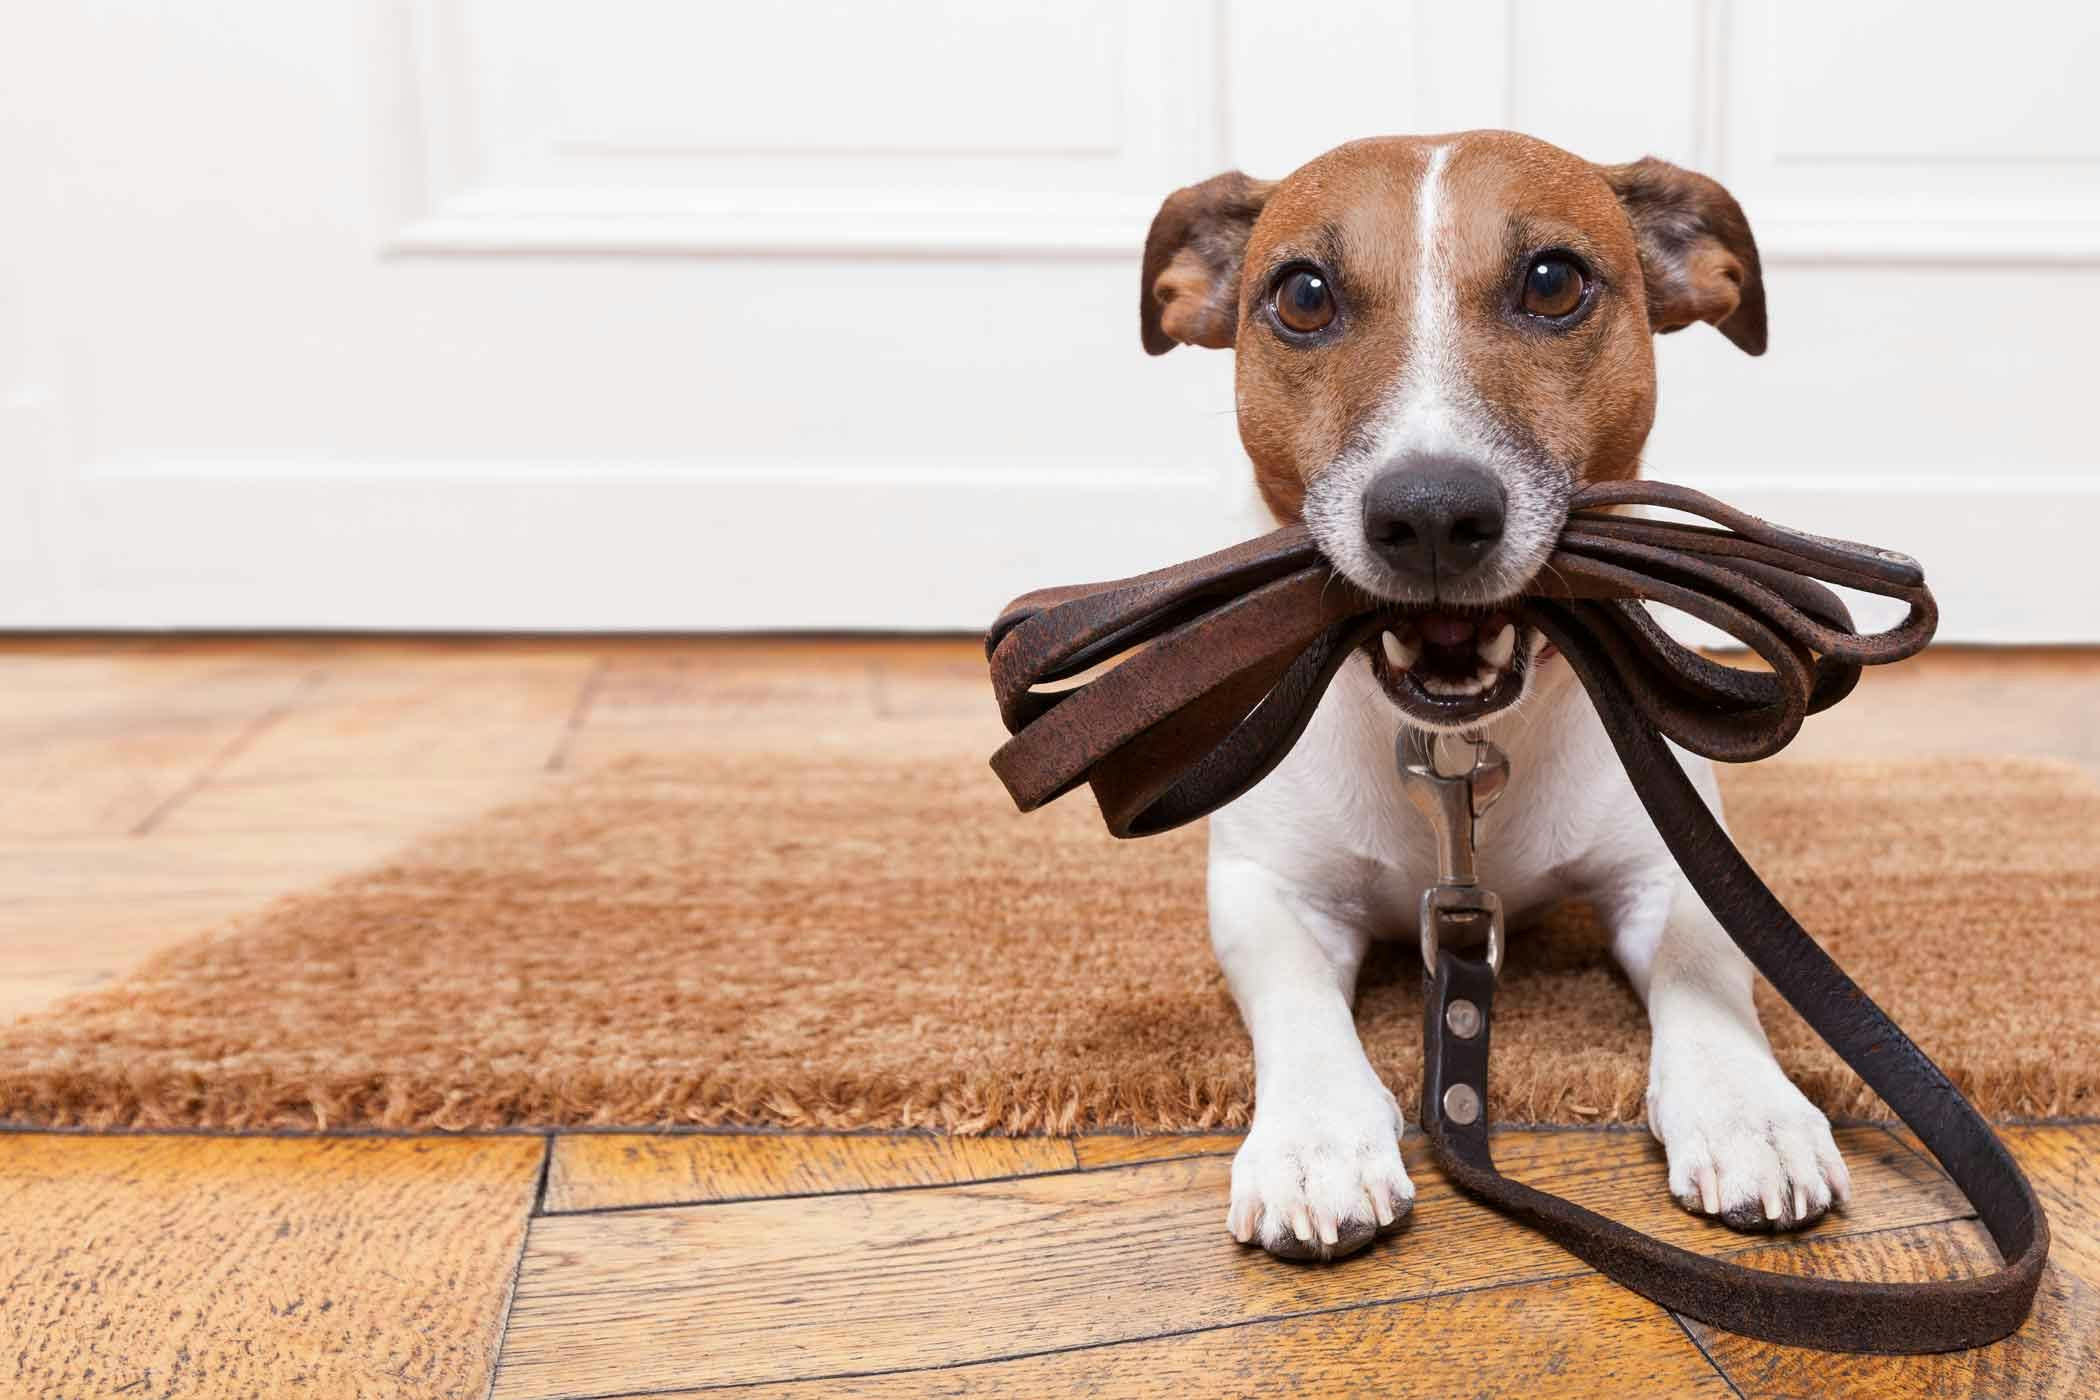 How to Train Your Dog to Use a Leash | Wag!